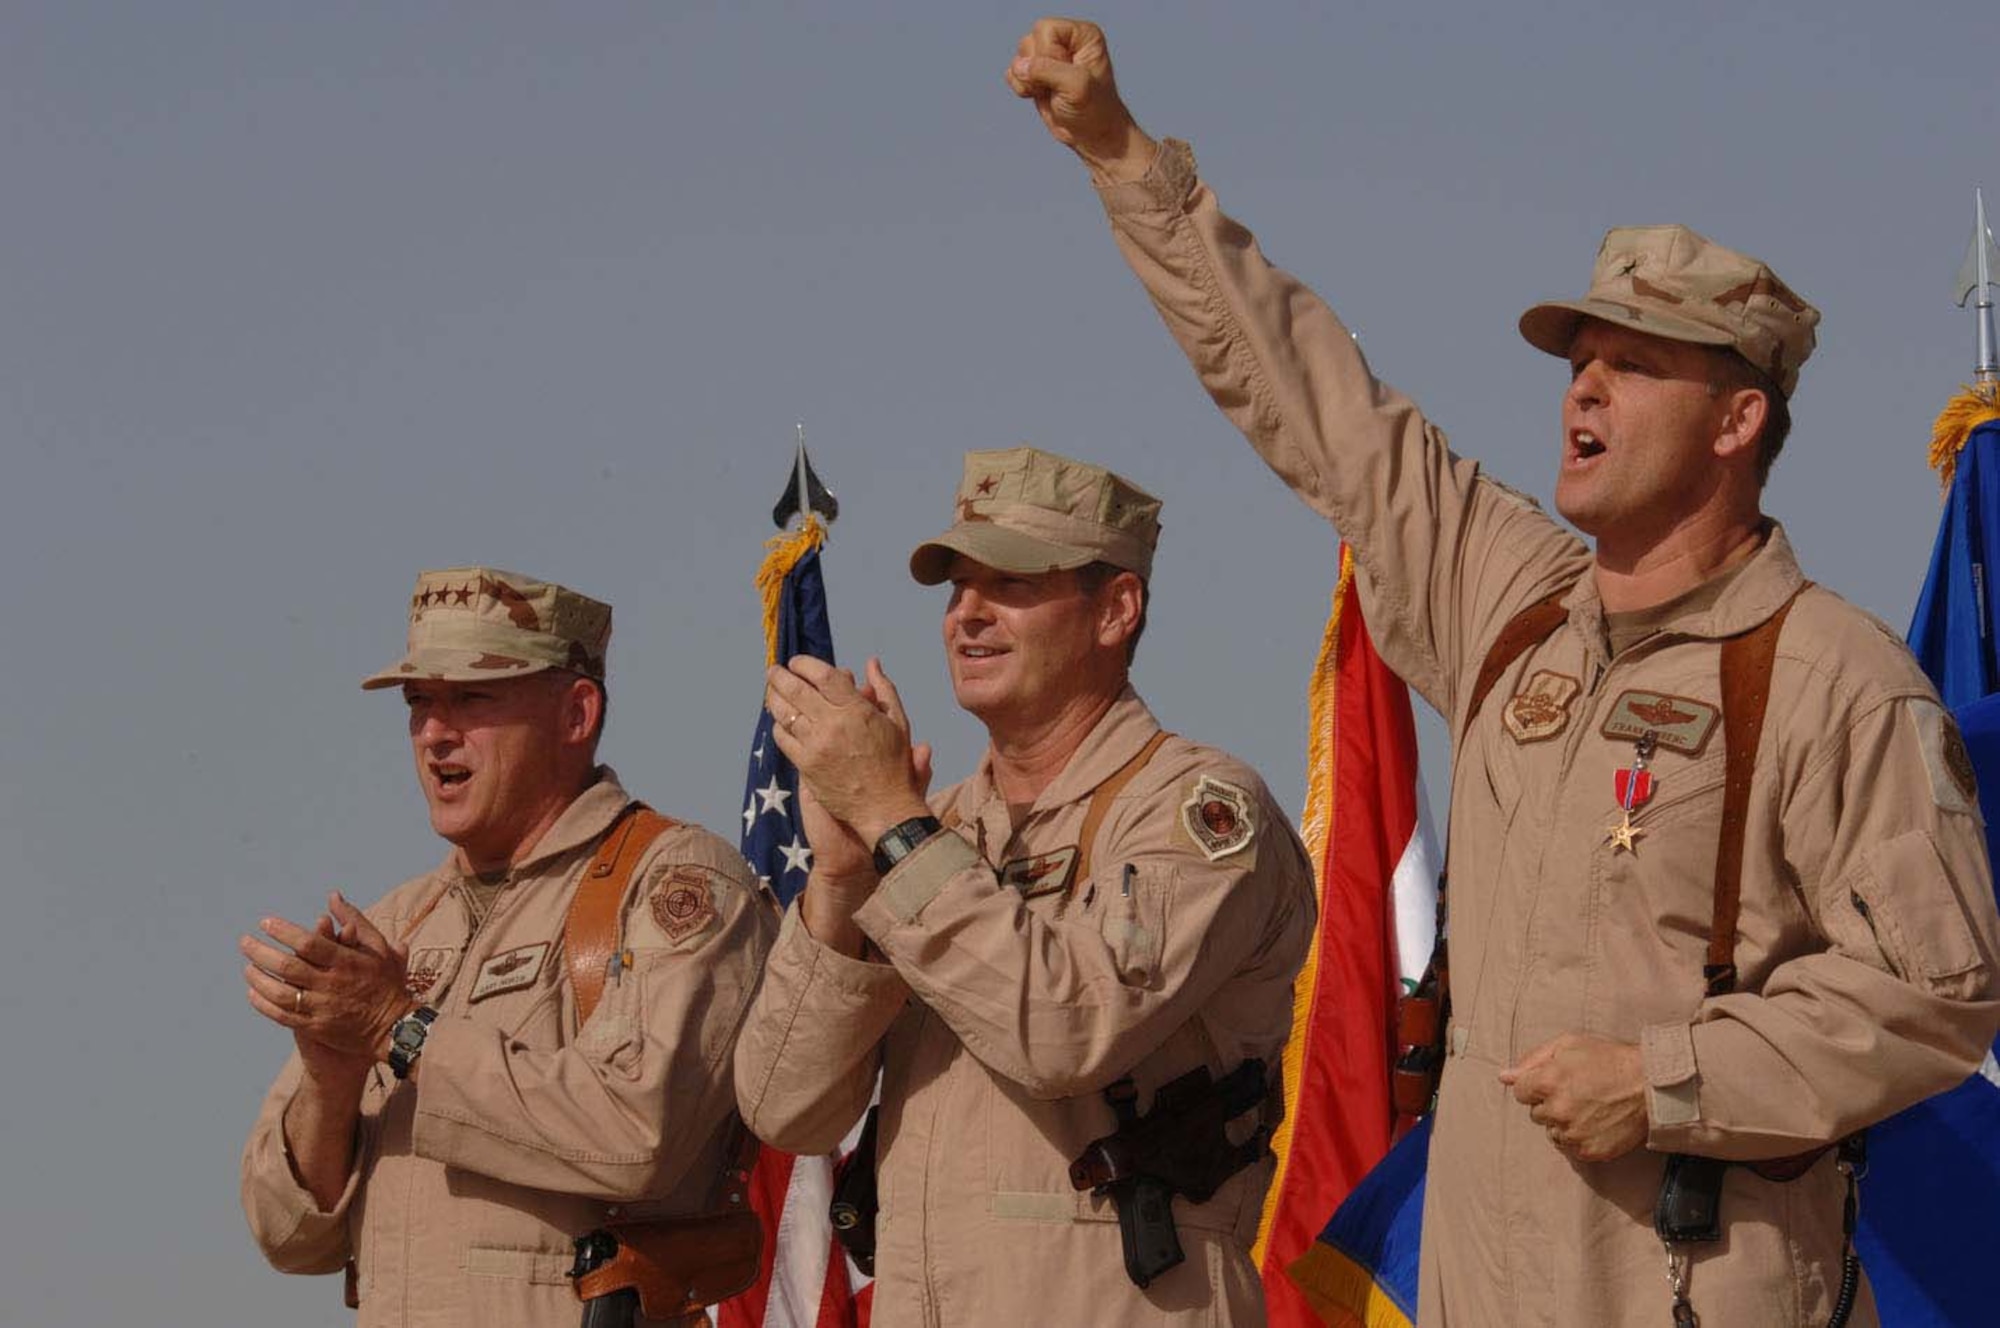 BALAD AIR BASE, Iraq -- "Give 'er the gun," shouts Brig. Gen. Frank Gorenc with his fist in the air while singing the Air Force song during the wing change of command ceremony here, July 5.  Lt. Gen. Gary North, U.S. Central Command Air Forces commander (left) officiated the passing of the 332d Air Expeditionary Wing flag to Brig. Gen. Robin Rand and announced that General Gorenc received the Moller Award as the most outstanding commander in Air Combat Command for his year of service in Iraq.  (U.S. Air Force photo by Staff Sgt. Tony Tolley) 